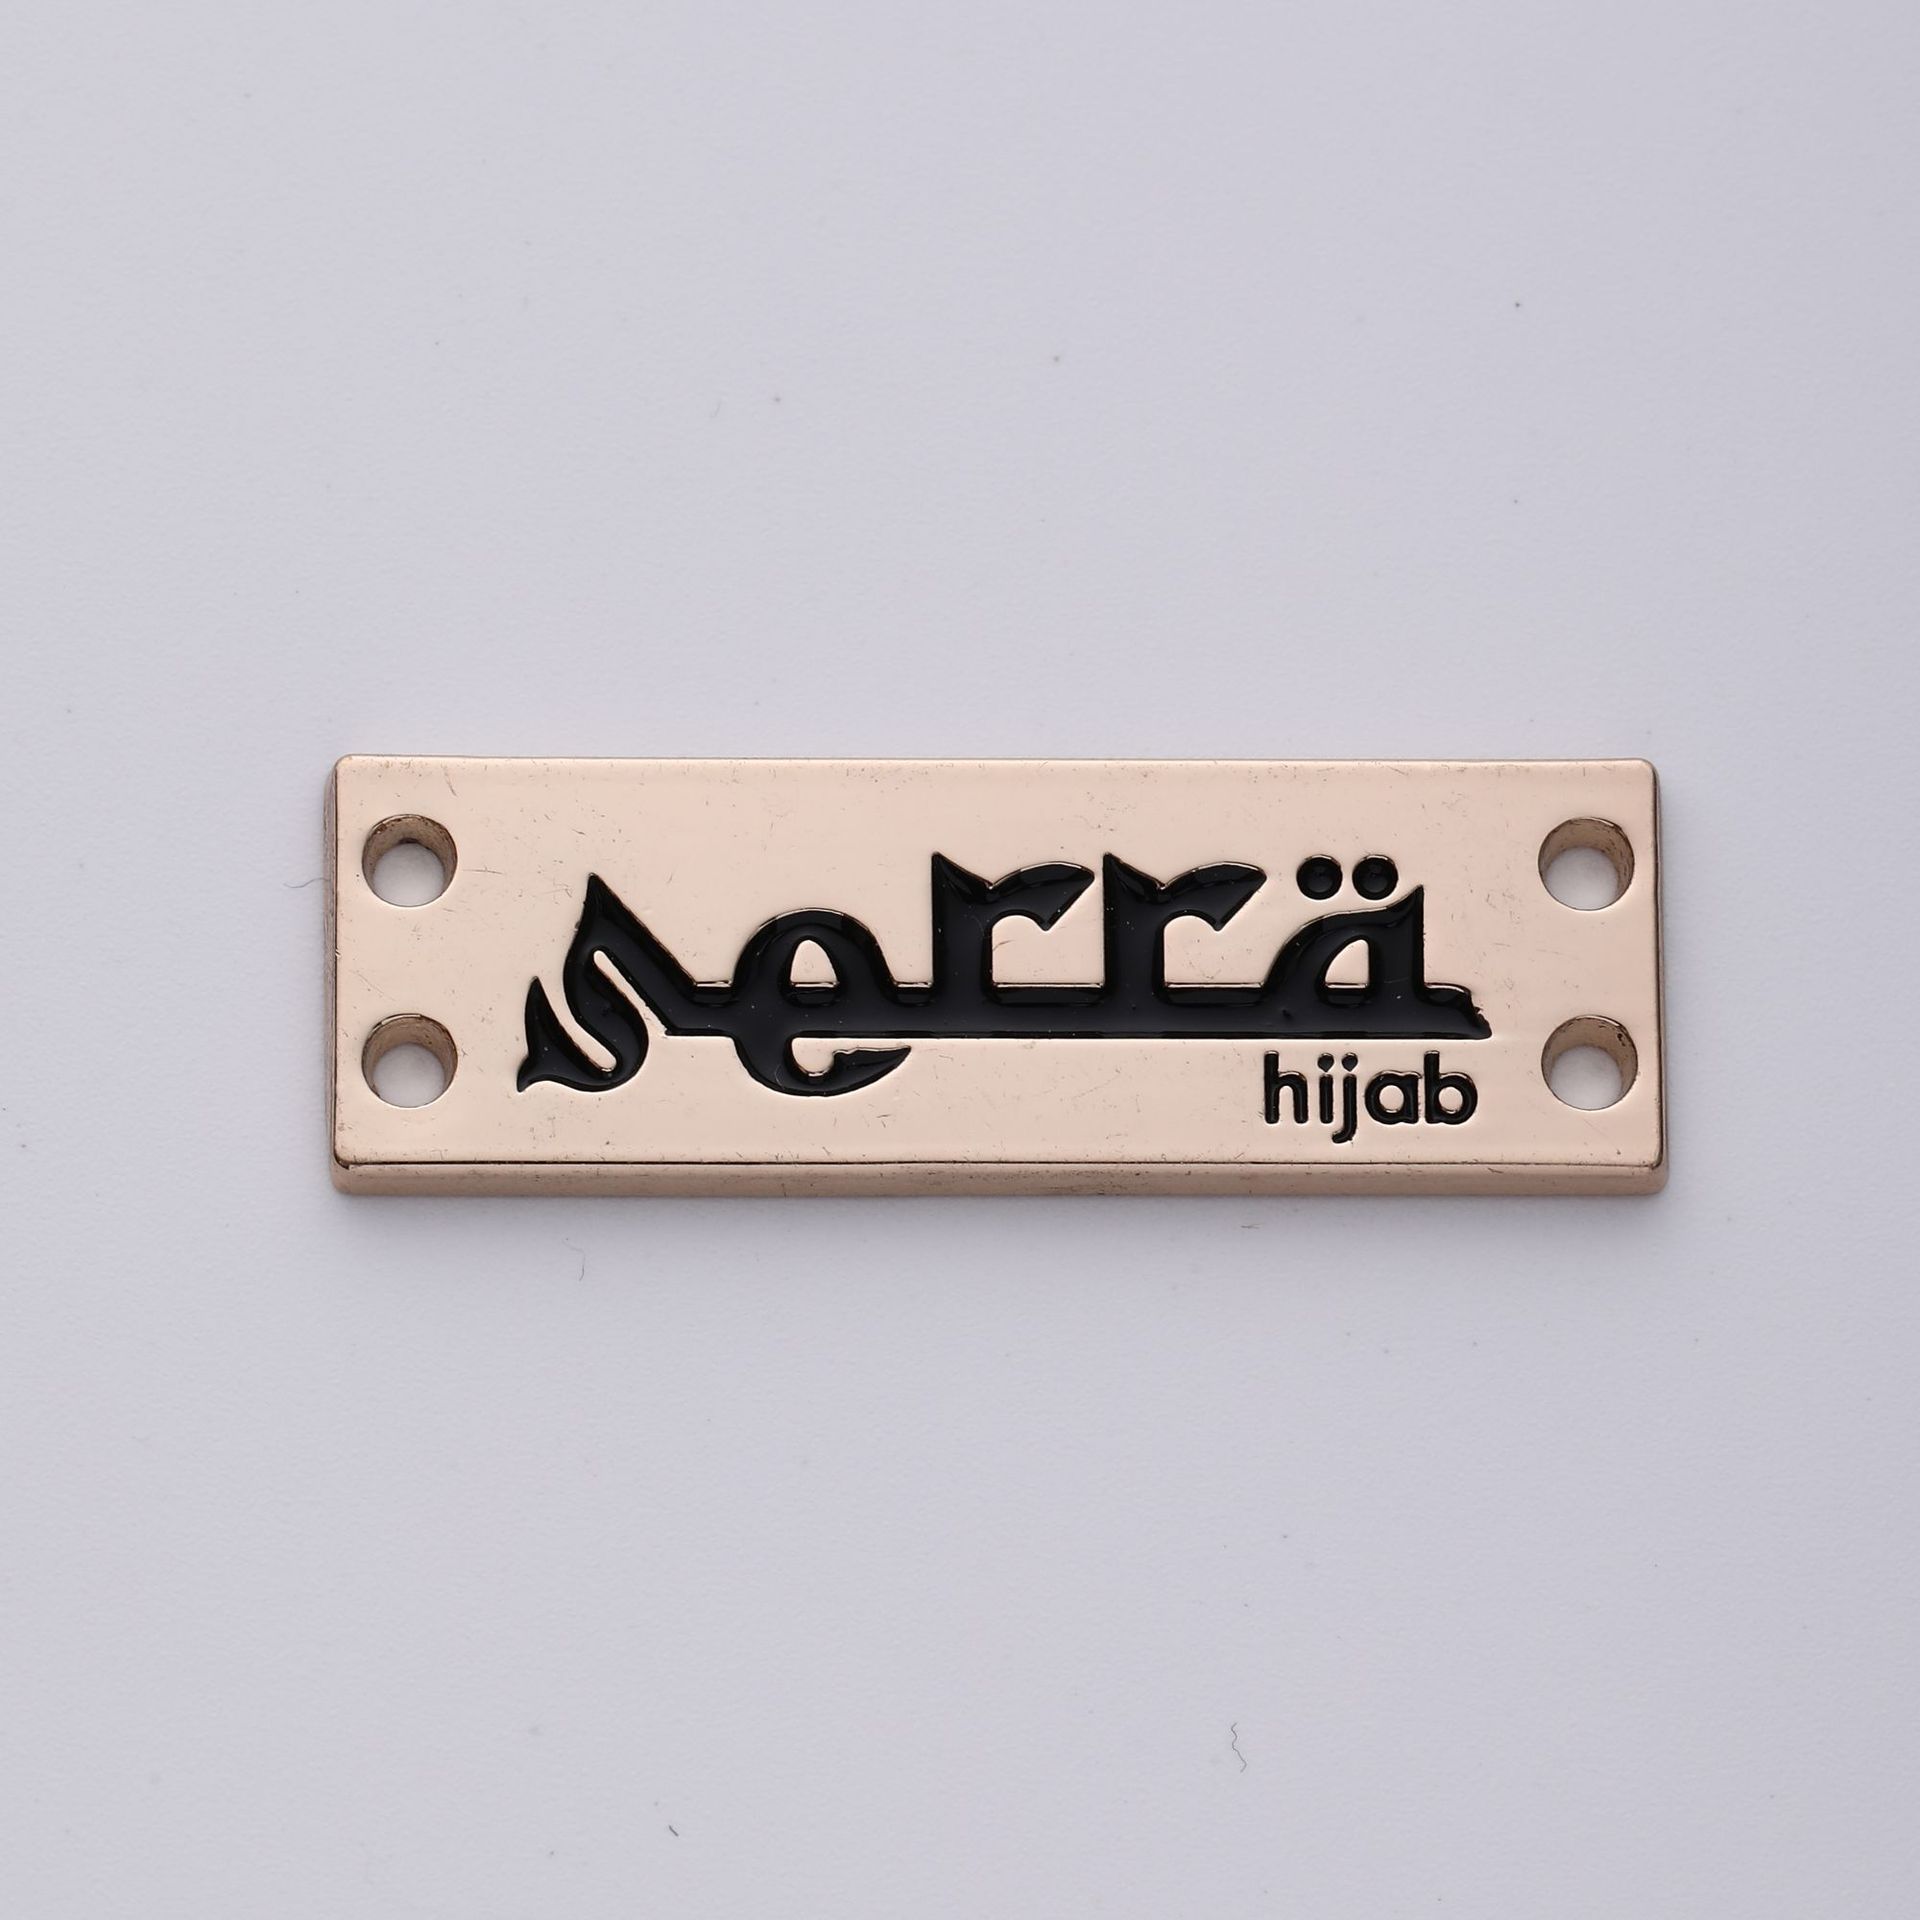 Rectangular Concave-Convex Letter Metal Stitching Sign Electroplating Stamping Zinc Alloy Mask Clothing Sweater Metal Badge